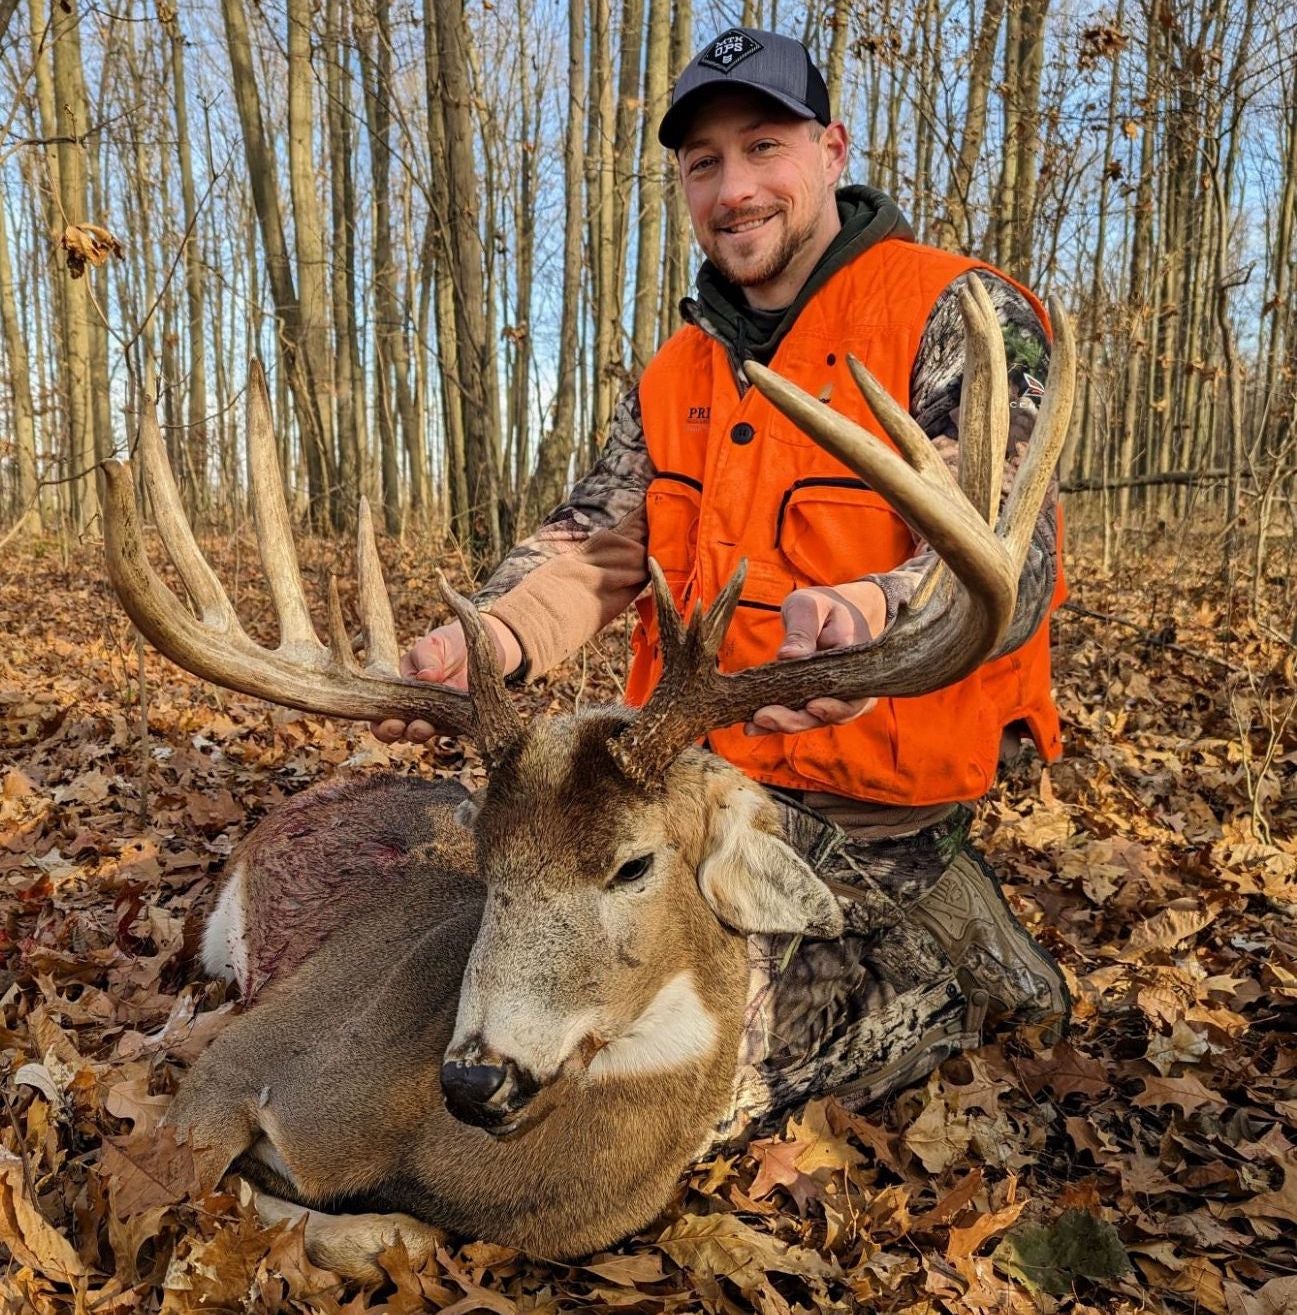 Hunter in orange vest kneels on the ground in the woods, showing off a giant whitetail buck